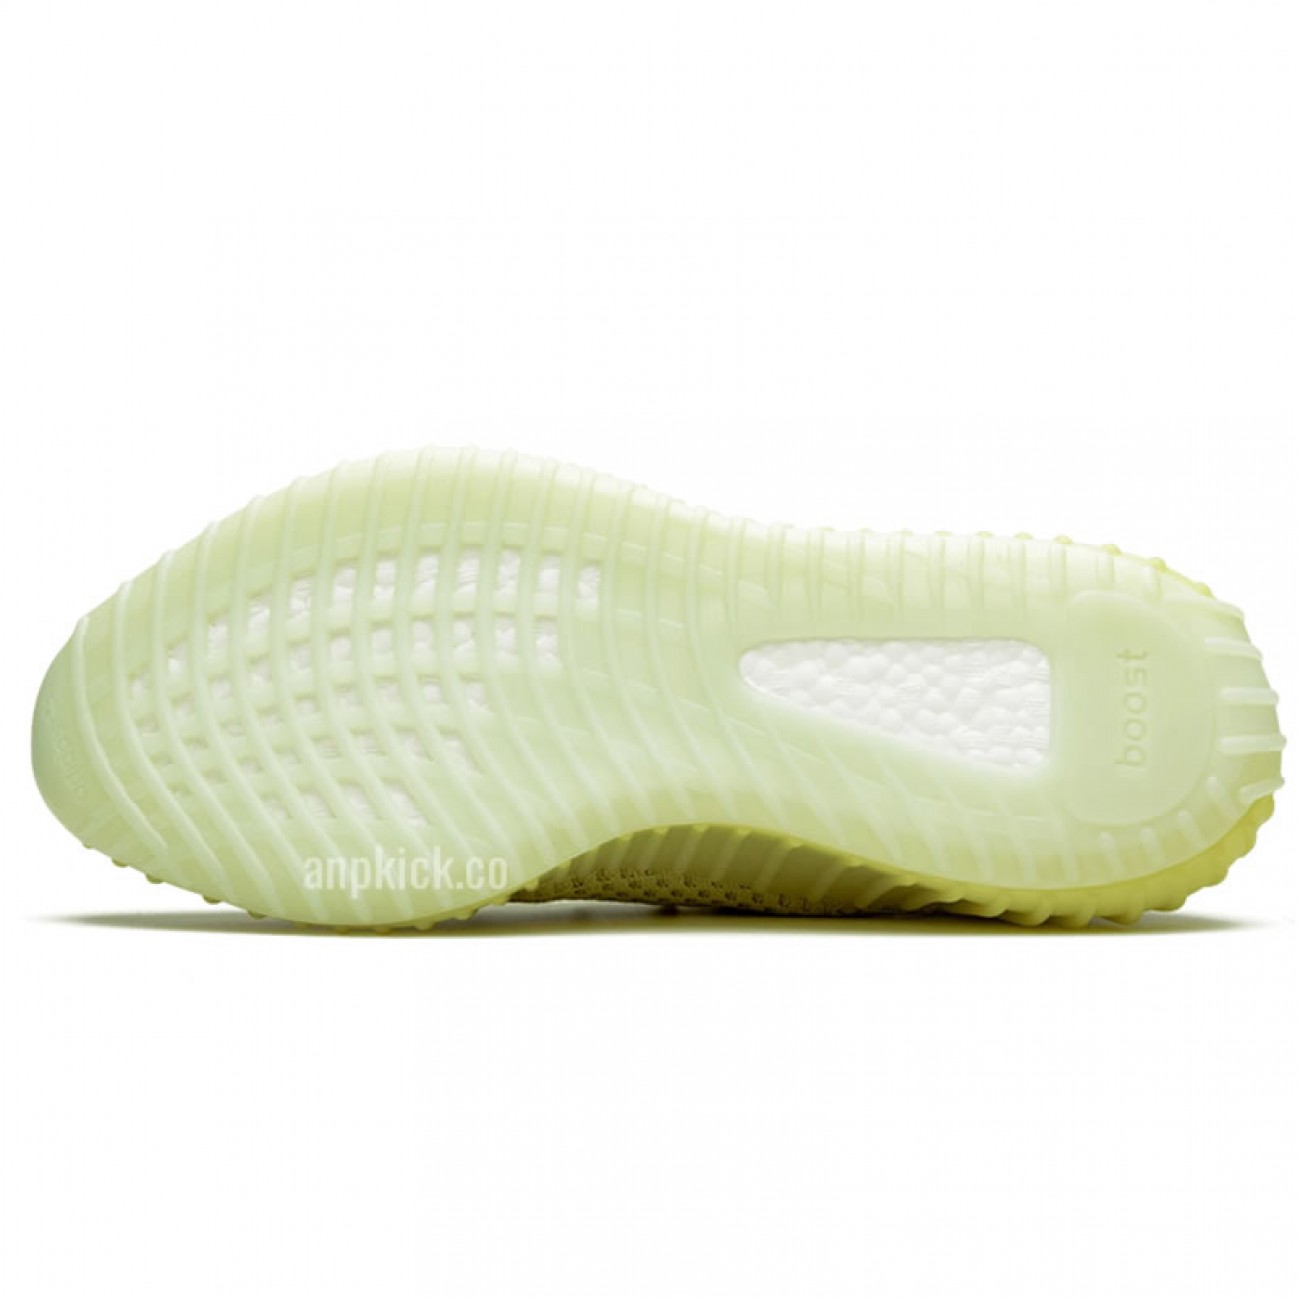 adidas Yeezy Boost 350 V2 "Marsh" Reflective FX9034 New Release Date